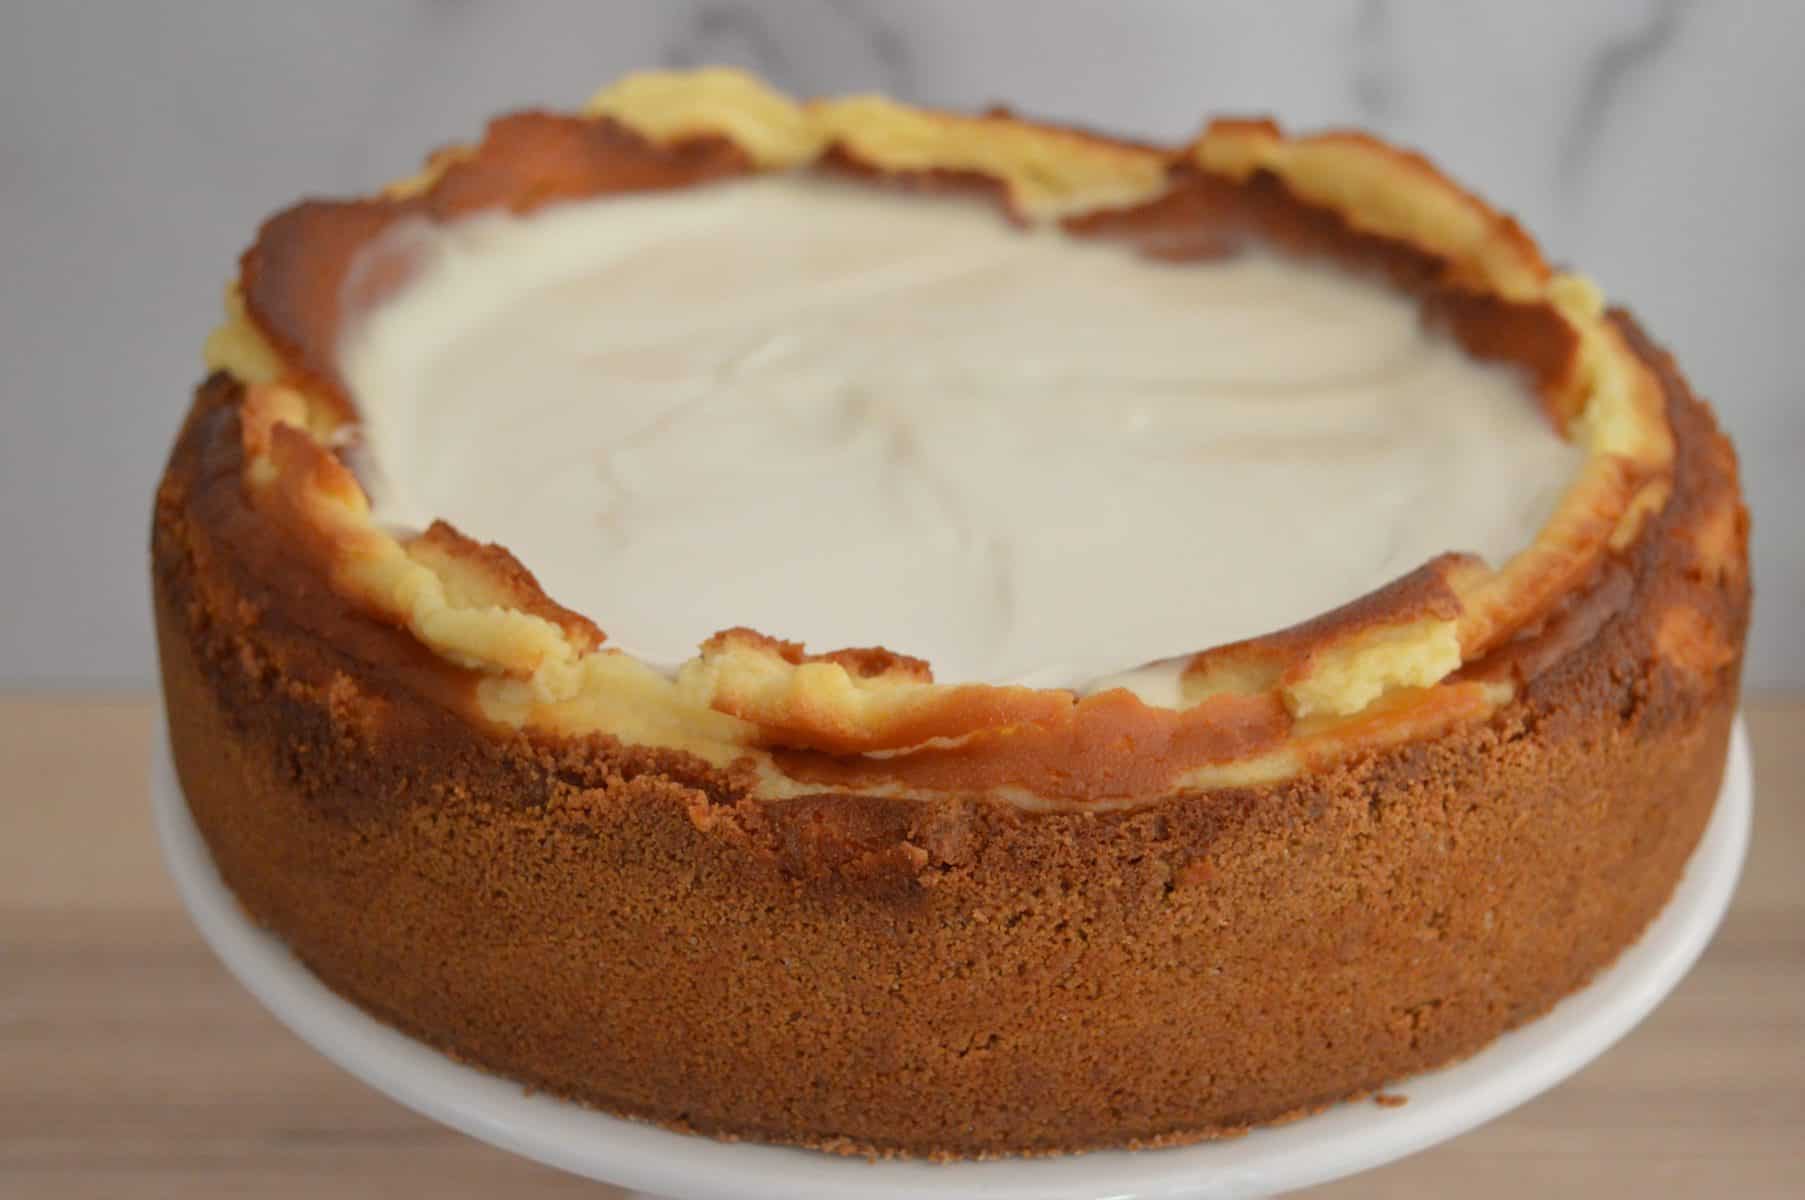 sour cream topping on cake.